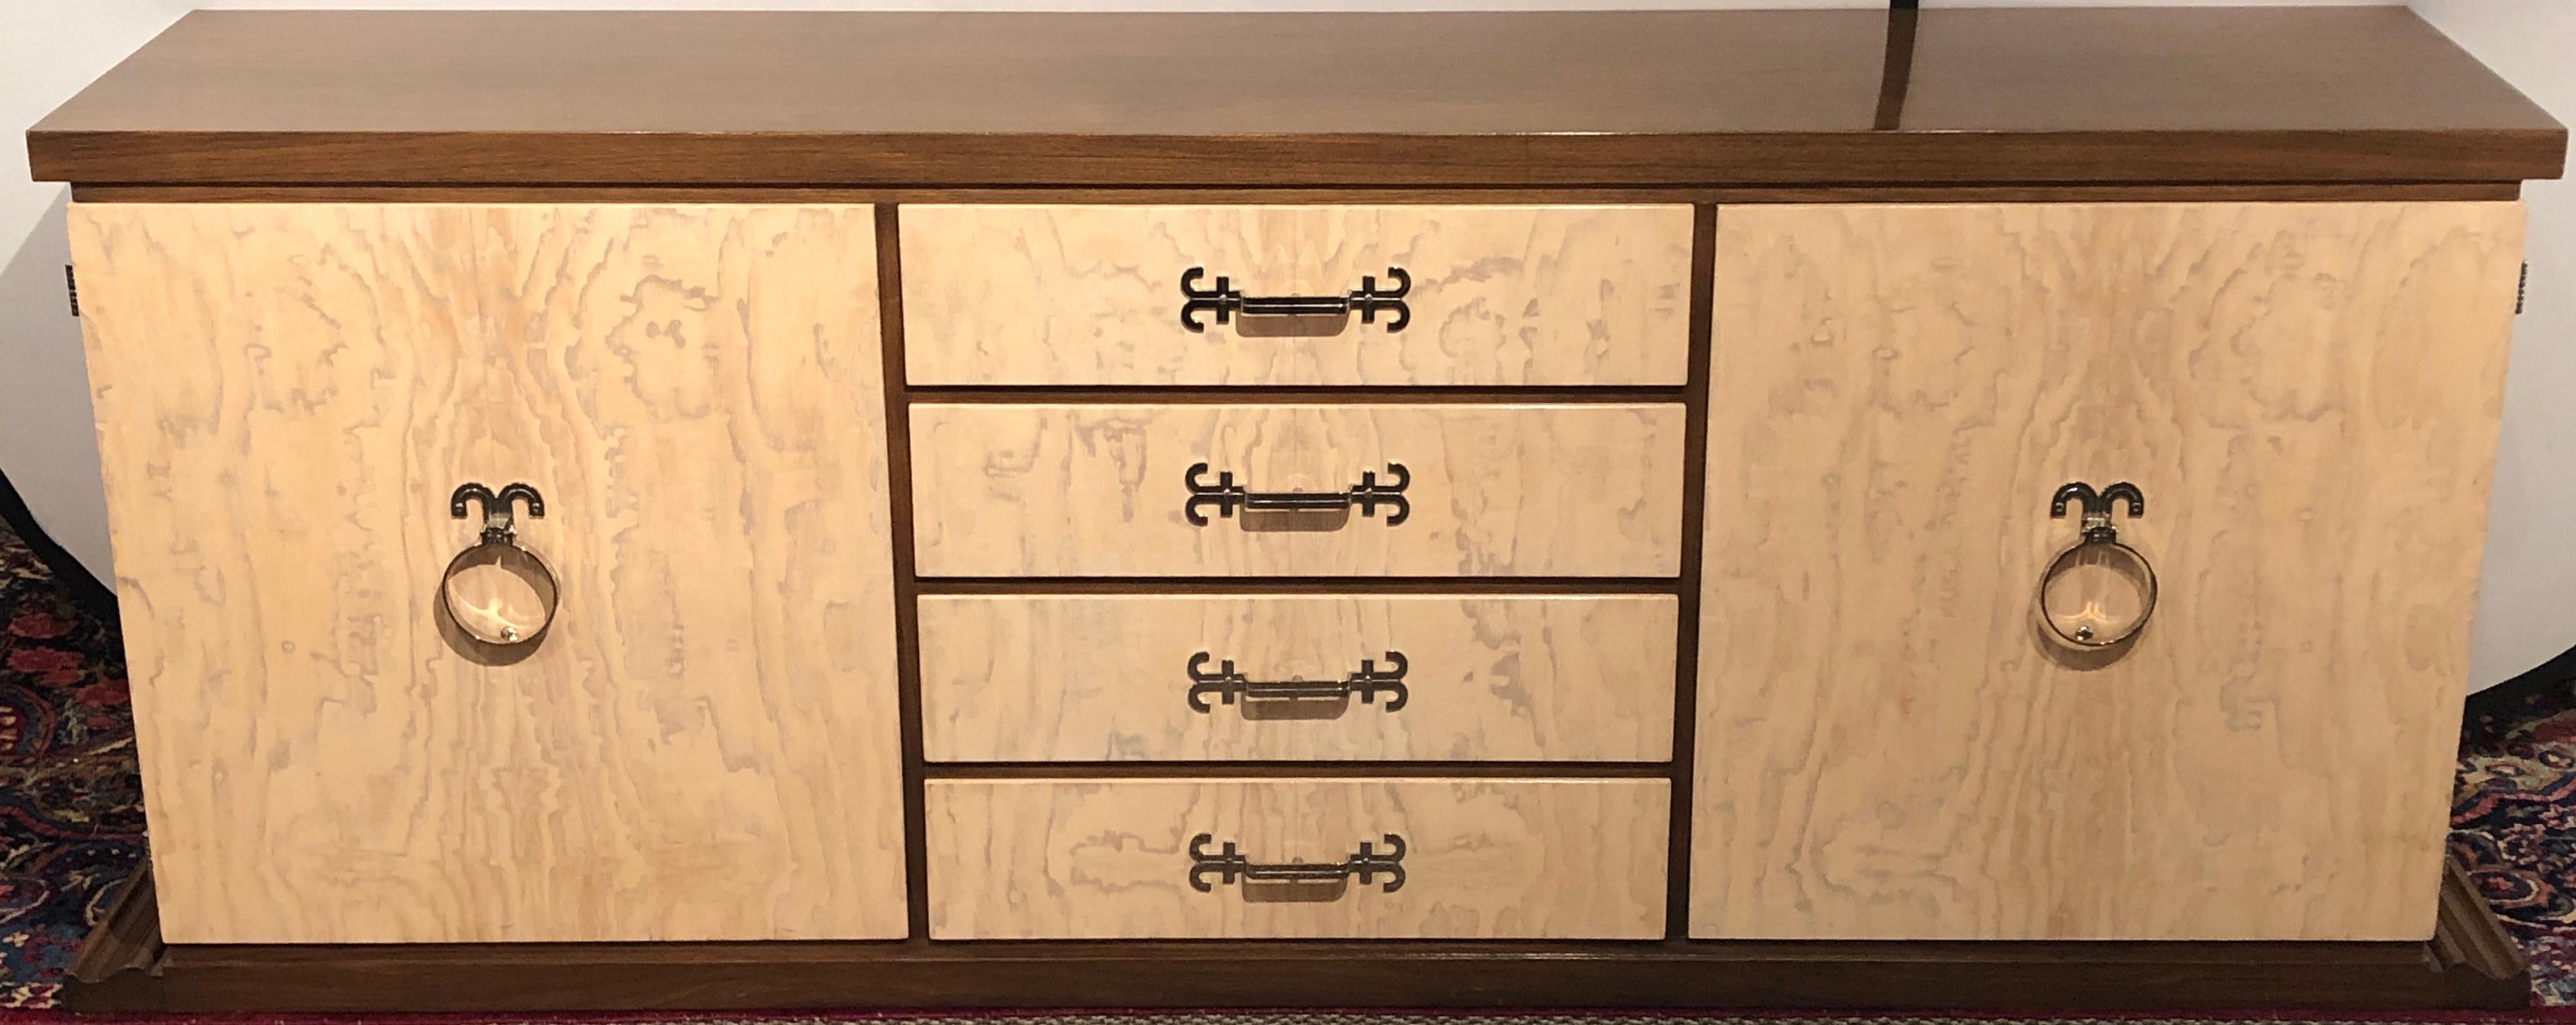 Large and impressive is this Tommi Parzinger spectacular sideboard / credenza branded Tommi Parzinger Originals. This rich lacquered walnut and whitewashed with lacquered burl cabinet is simply stunning and in wonderful condition. The case itself